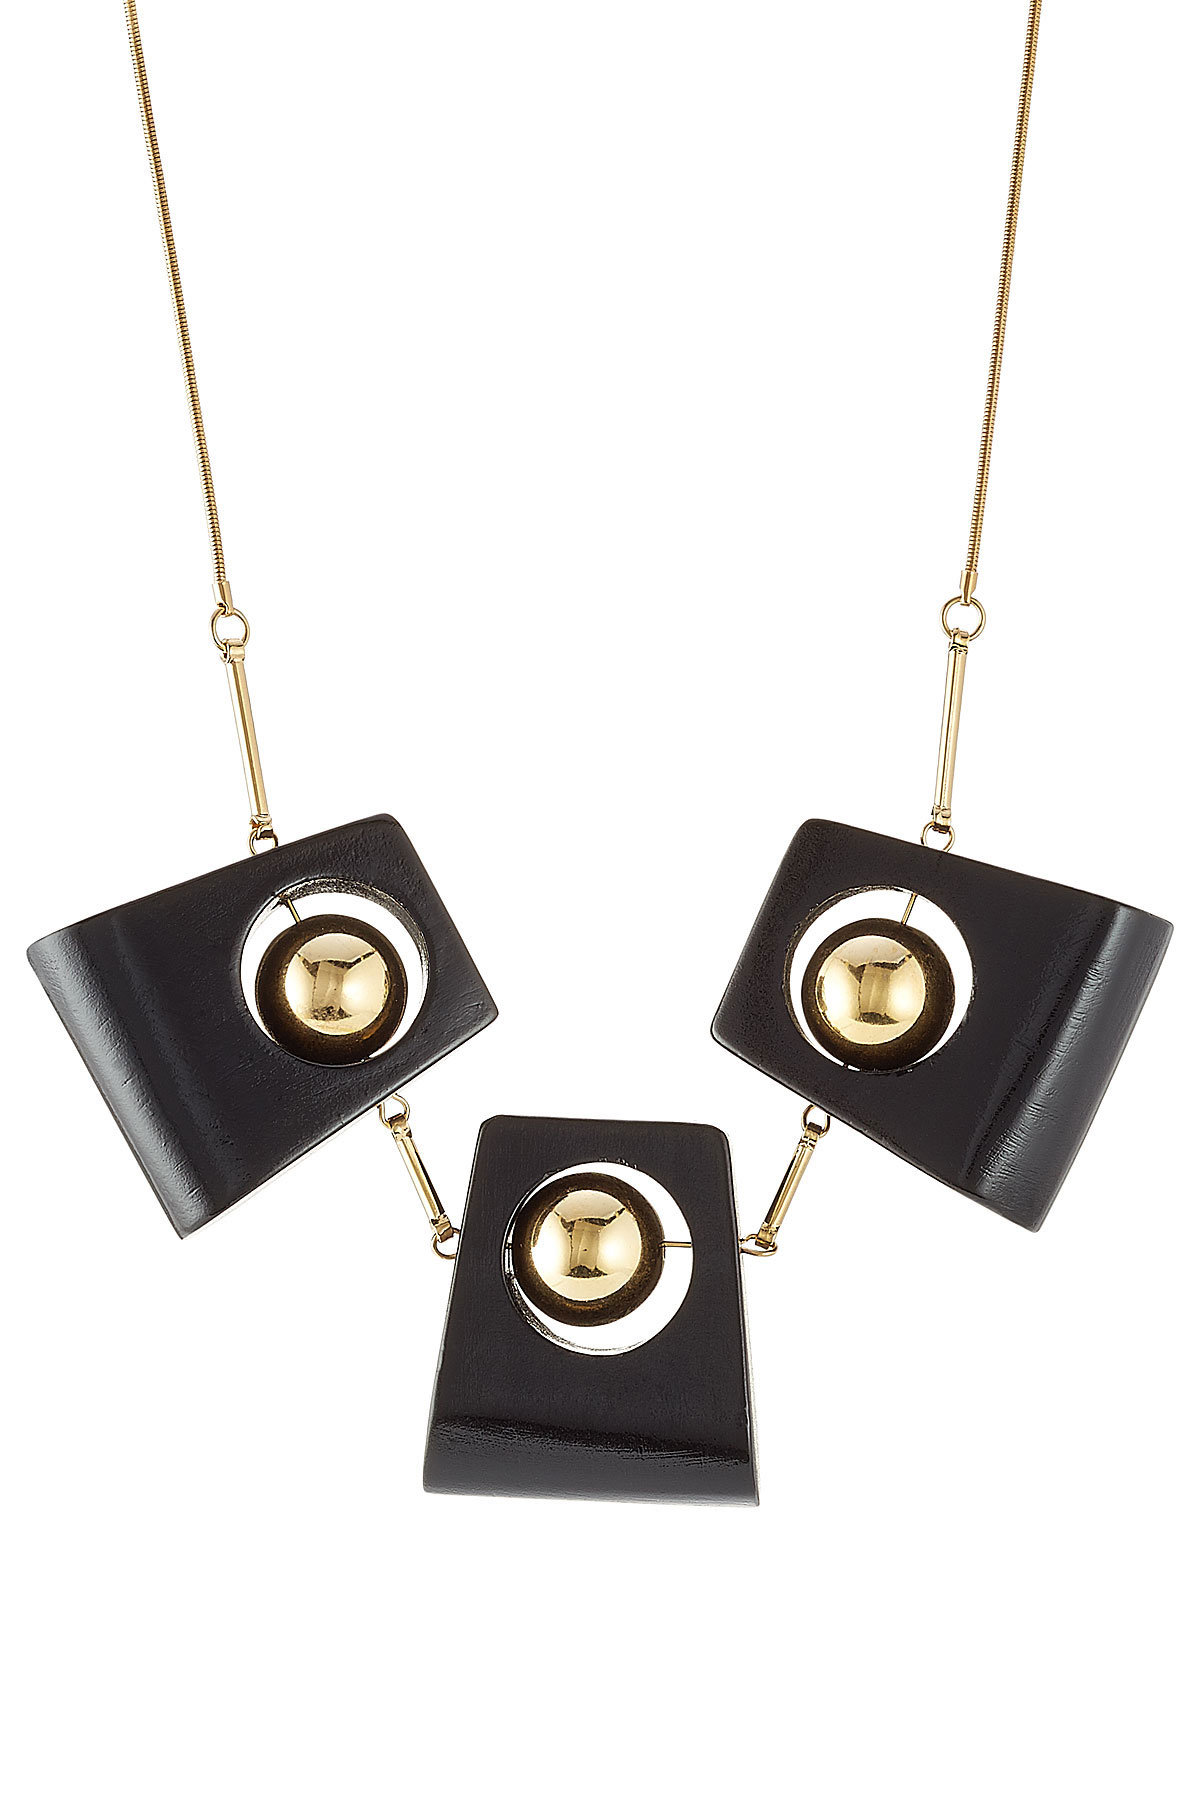 Marni - Statement Necklace with Wood